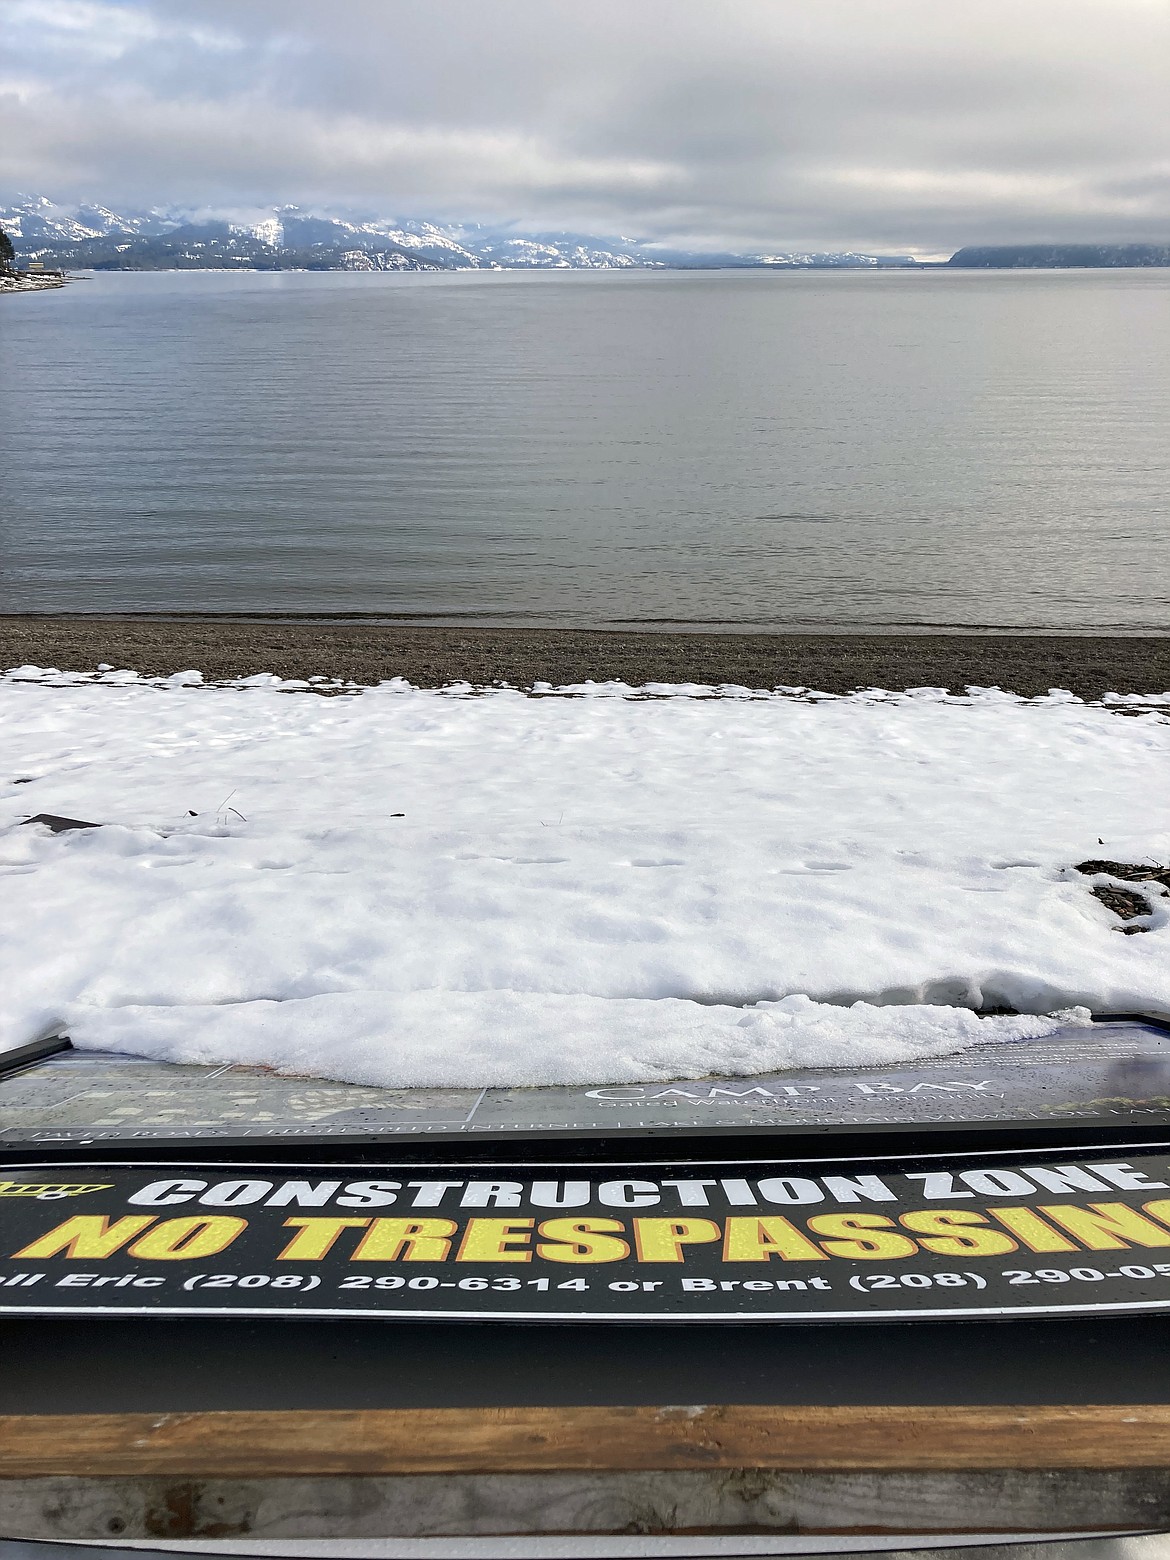 A trespassing sign in the Camp Bay Road area. Whether 50 feet of shoreline in Camp Bay stays open to the public is scheduled to be decided by the Bonner County commissioners on Feb. 16.